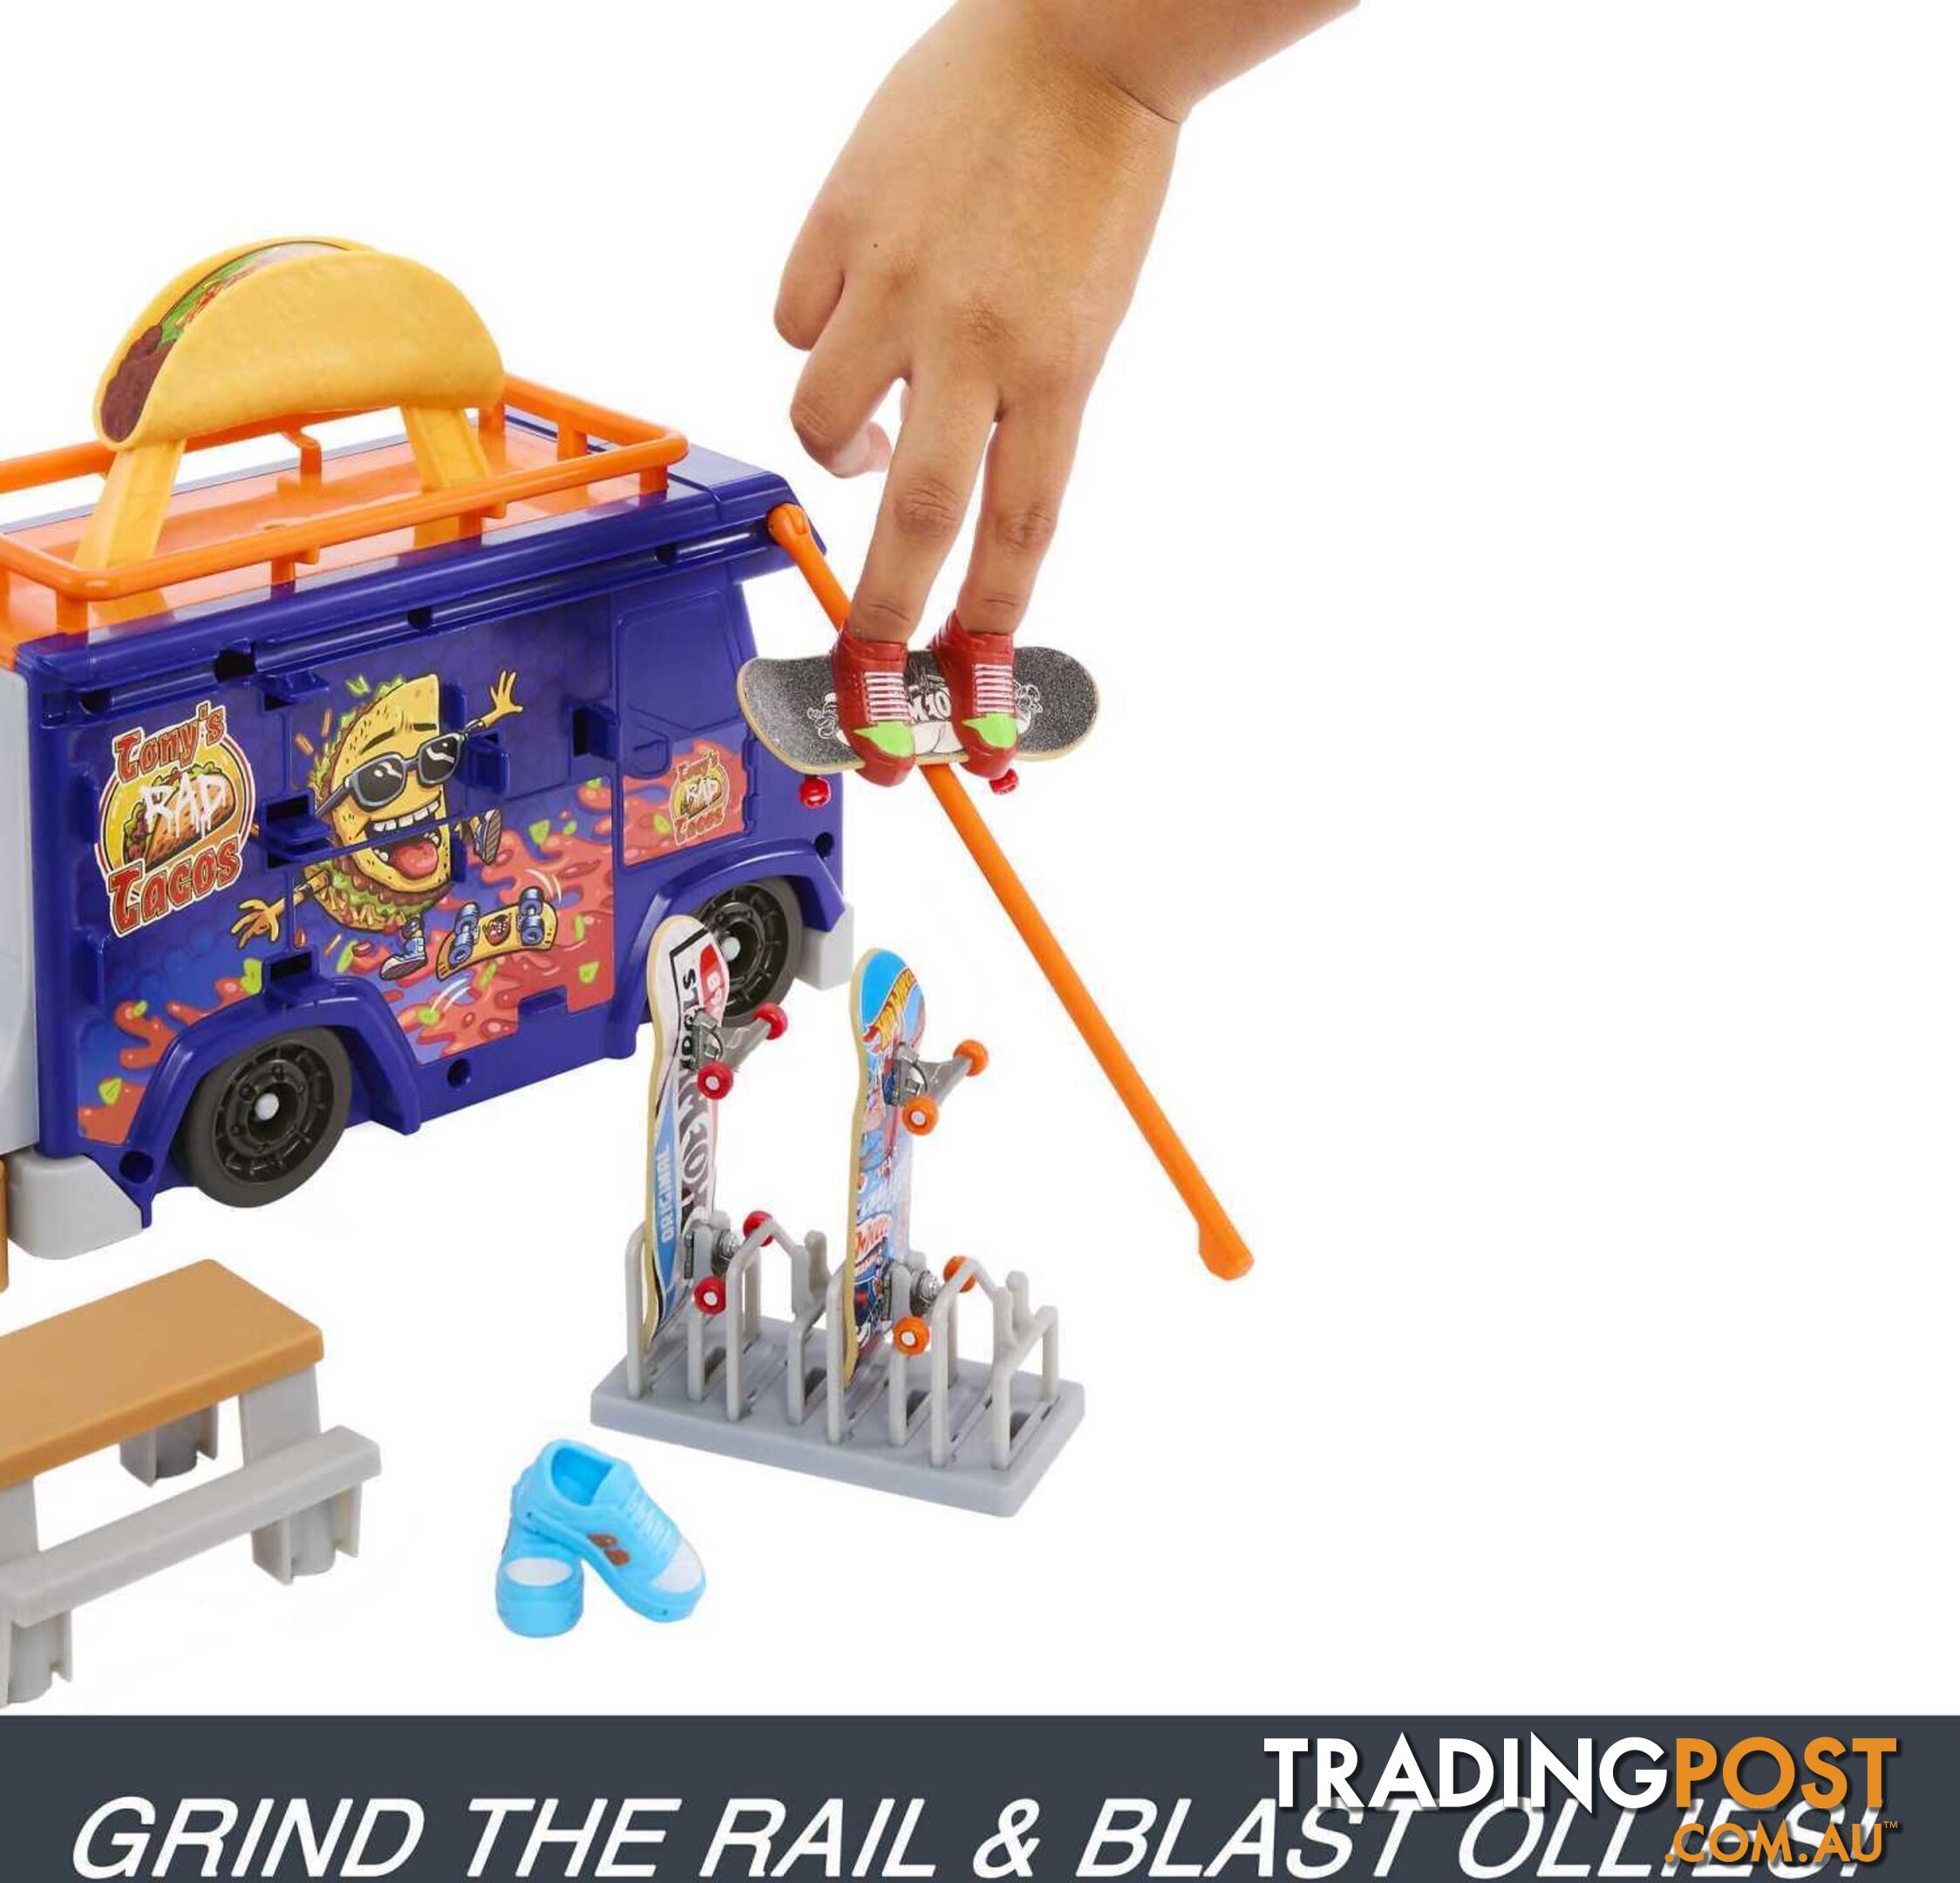 Hot Wheels - Hot Wheels Skate Taco Truck Play Case With 1 Fingerboard & 1 Pair Of Shoes - Mattel - Mahmk00 - 194735129096